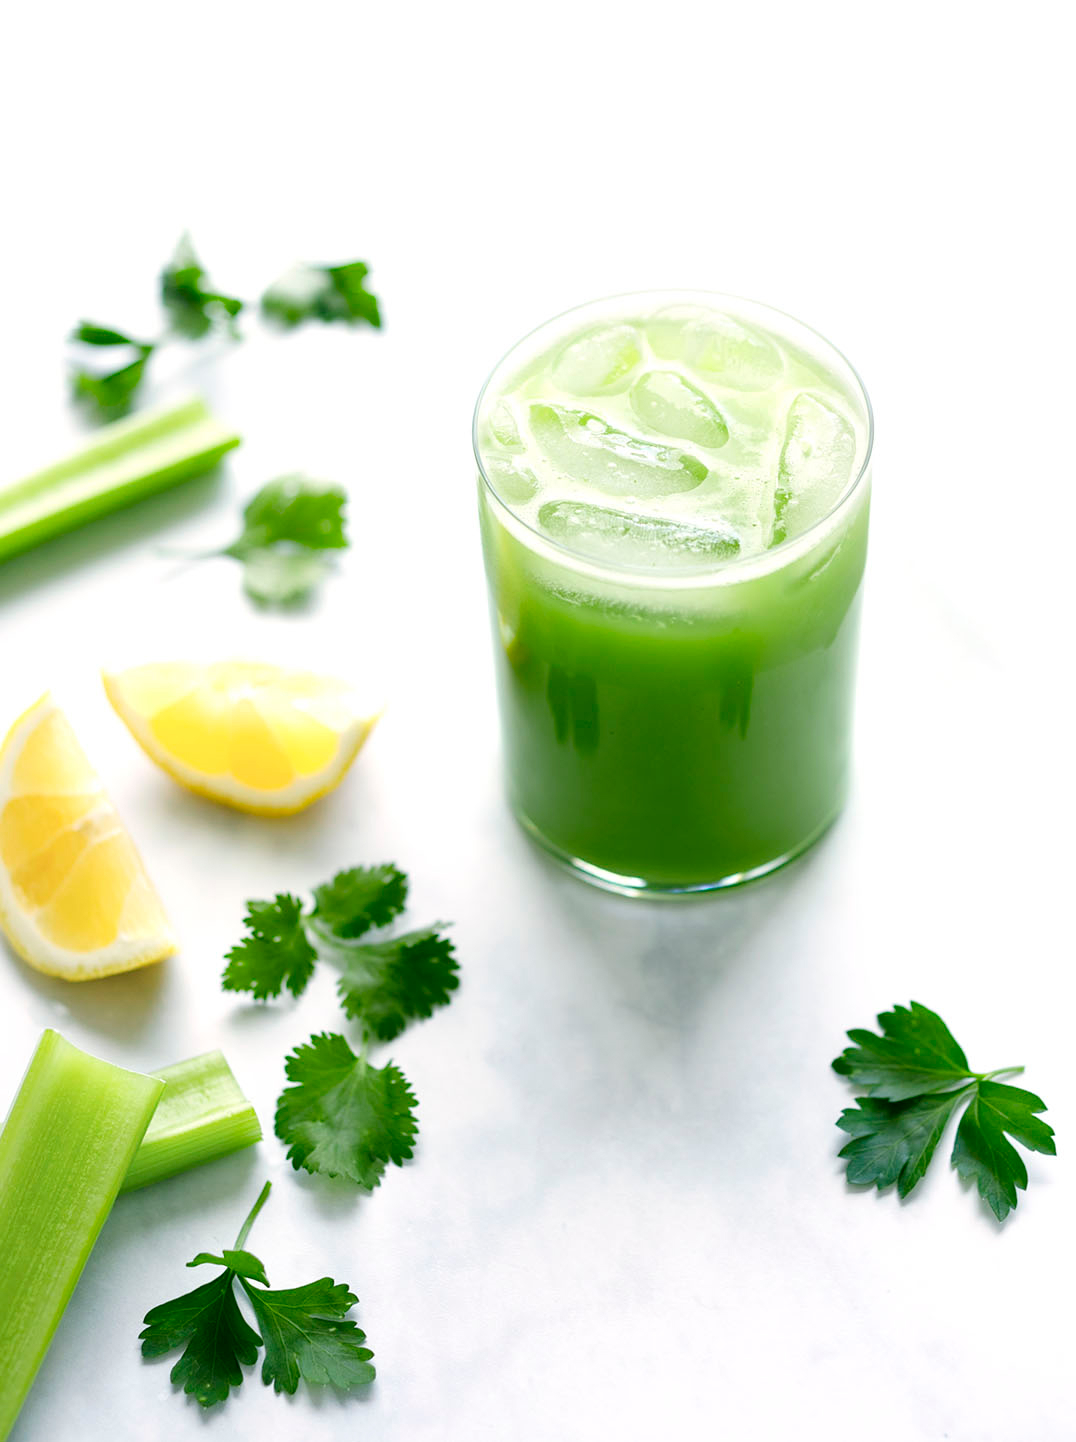 A glass of Green Herb Juice with celery, lemon, and parsley in the background